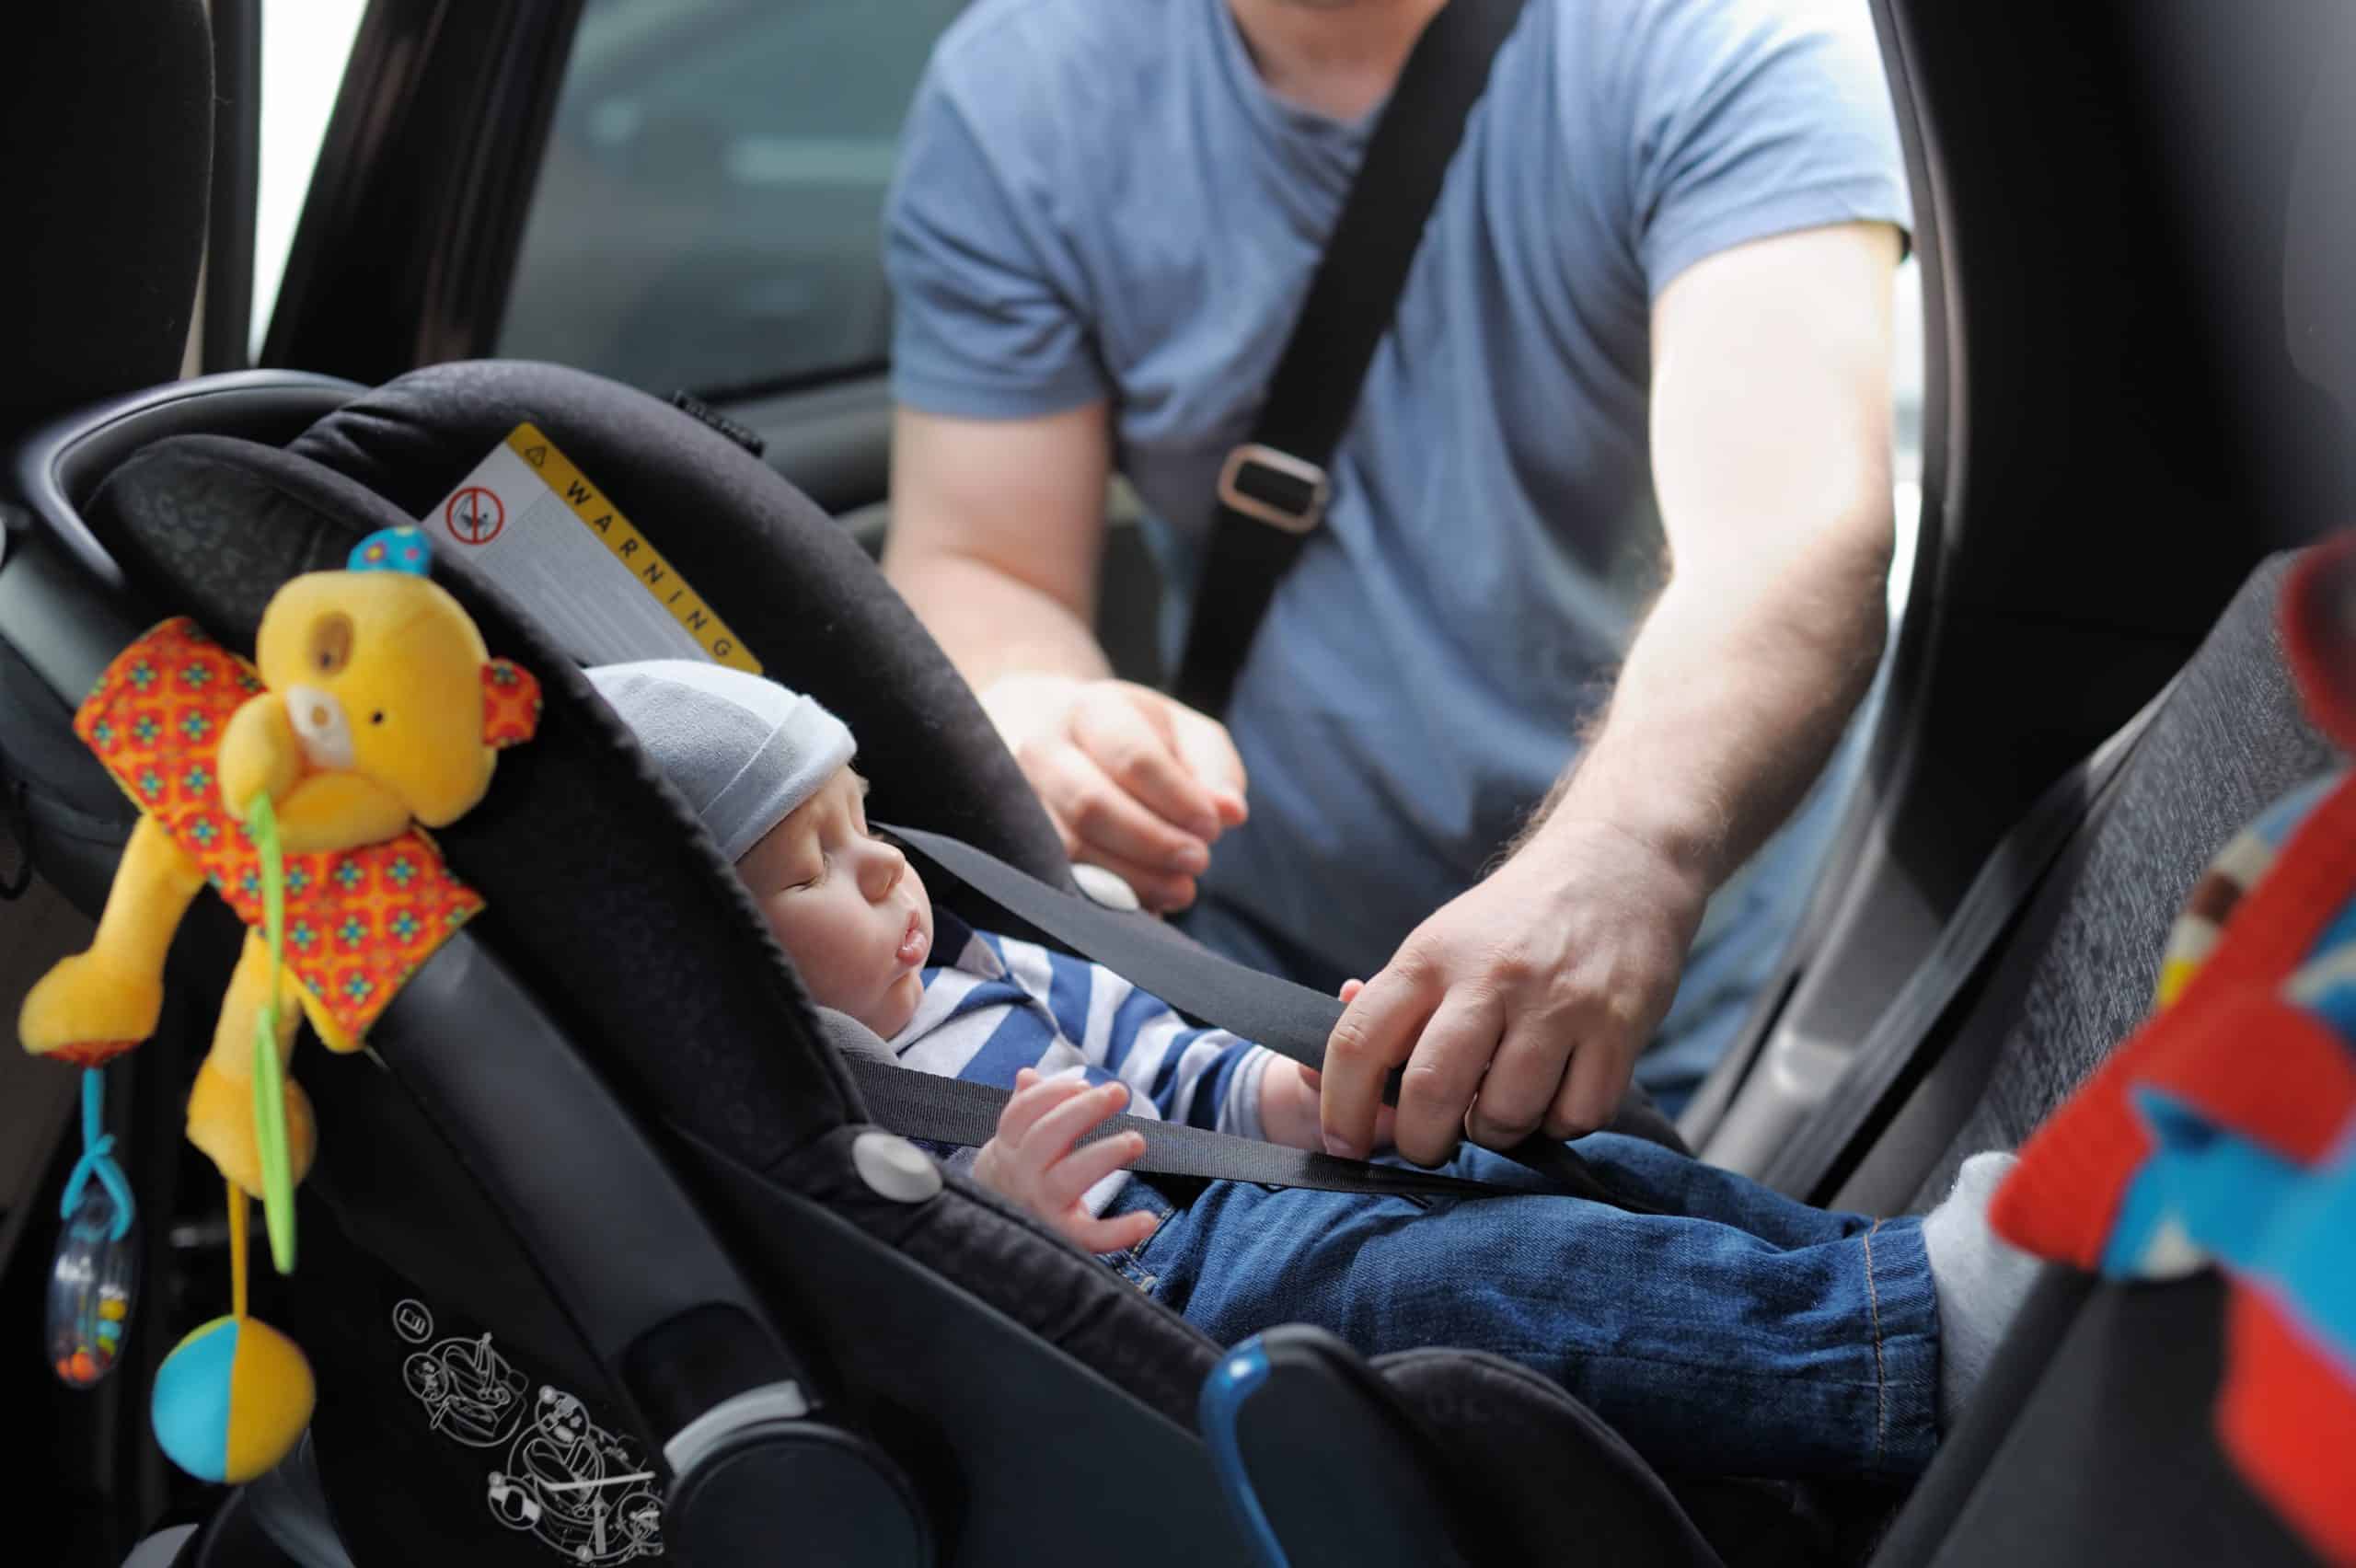 how long can a baby stay in a car seat